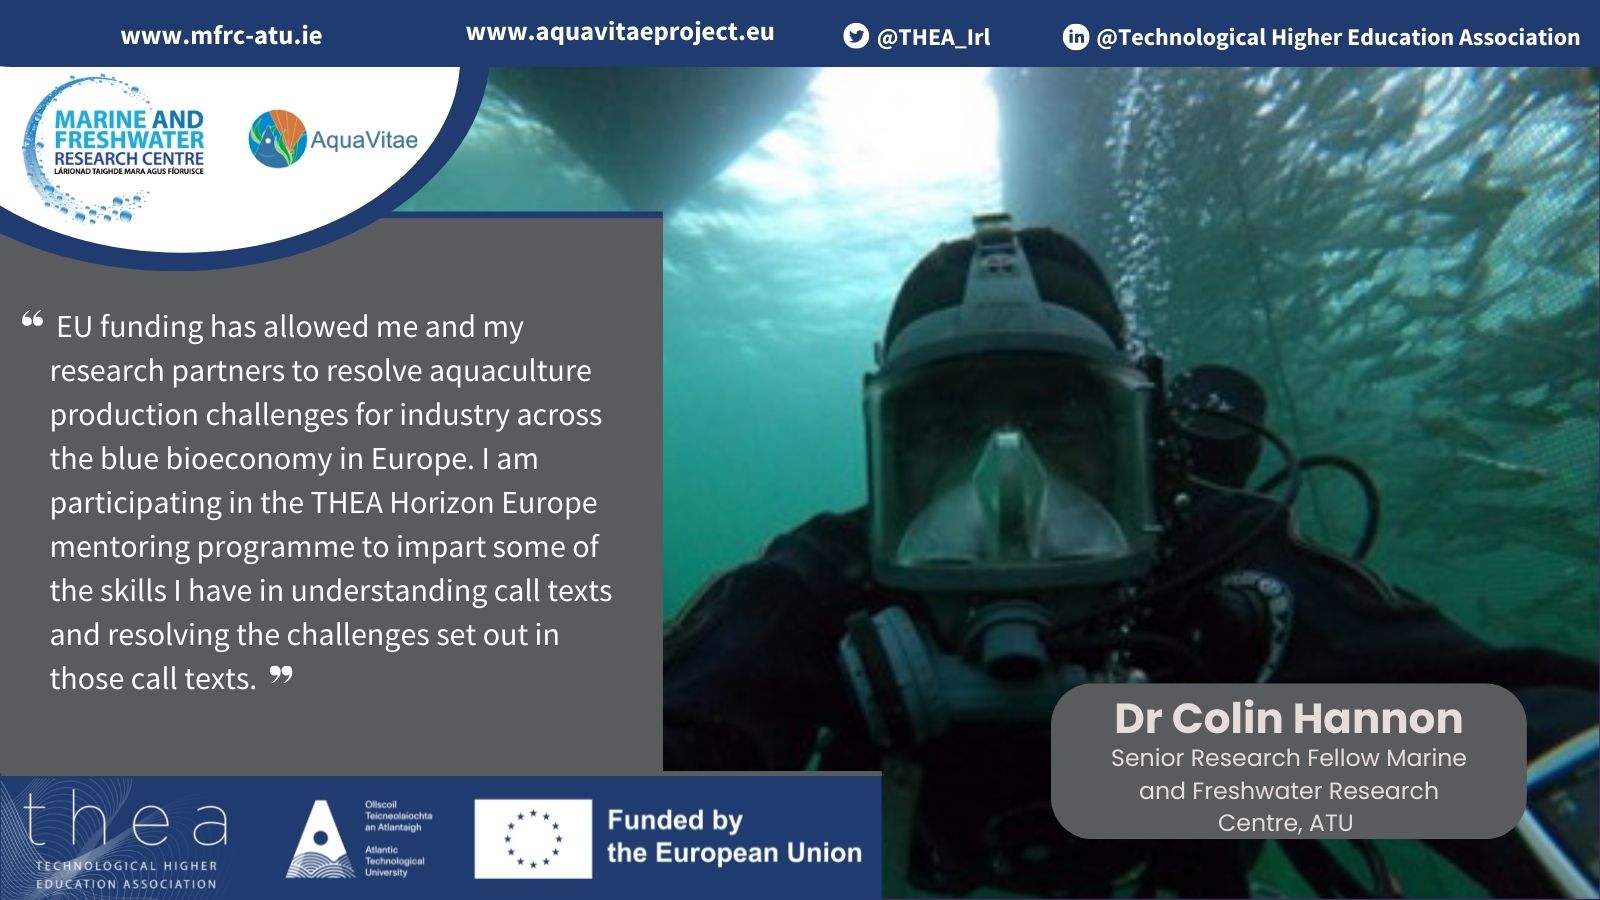 Dr Colin Hannon, Senior Research Fellow Marine and Freshwater Research Centre, Atlantic Technological University